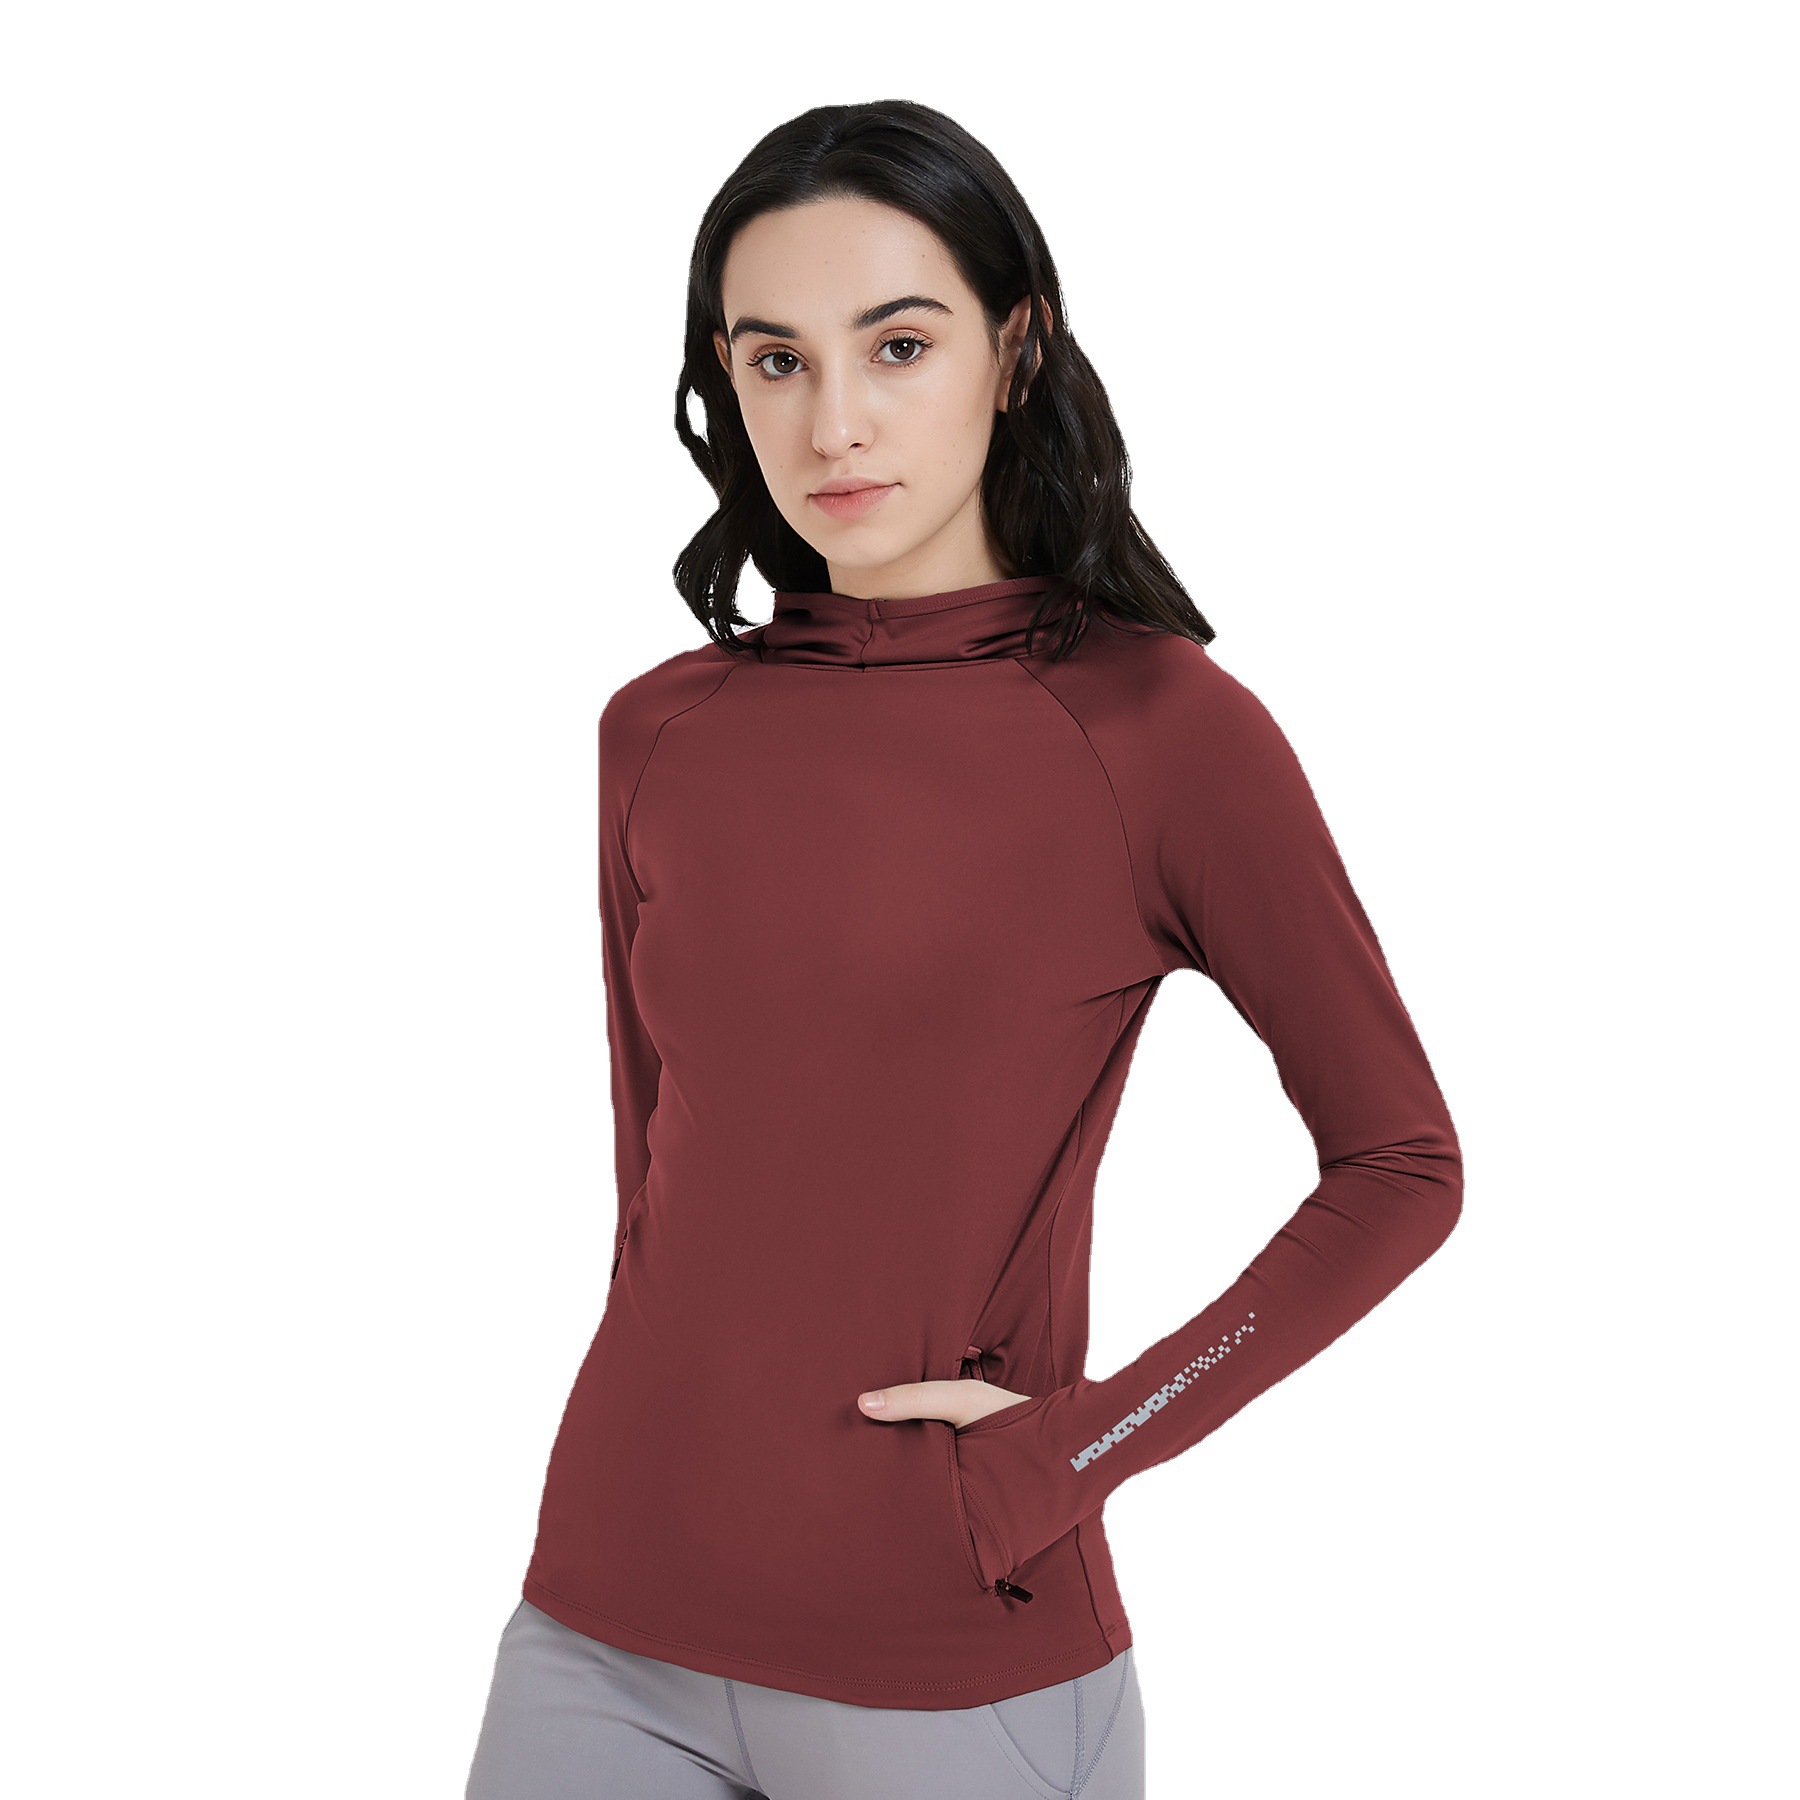 Outdoor Windproof Hooded Long Sleeve T Shirts With Reflector High Neck Yoga Fitness Tops Women